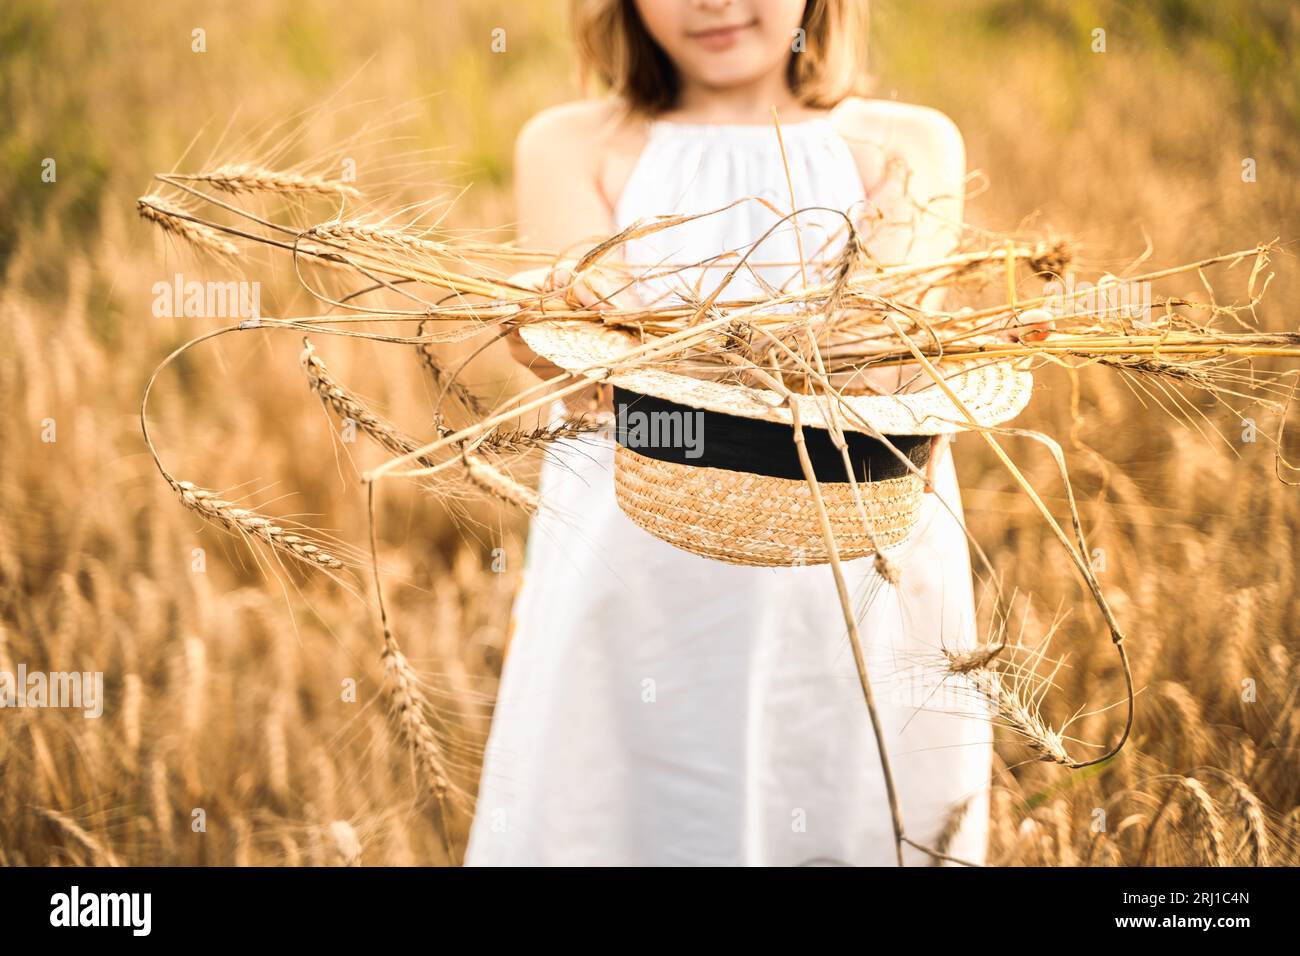 Happy girl in white dress with straw hat full of ears of wheat, rye ...